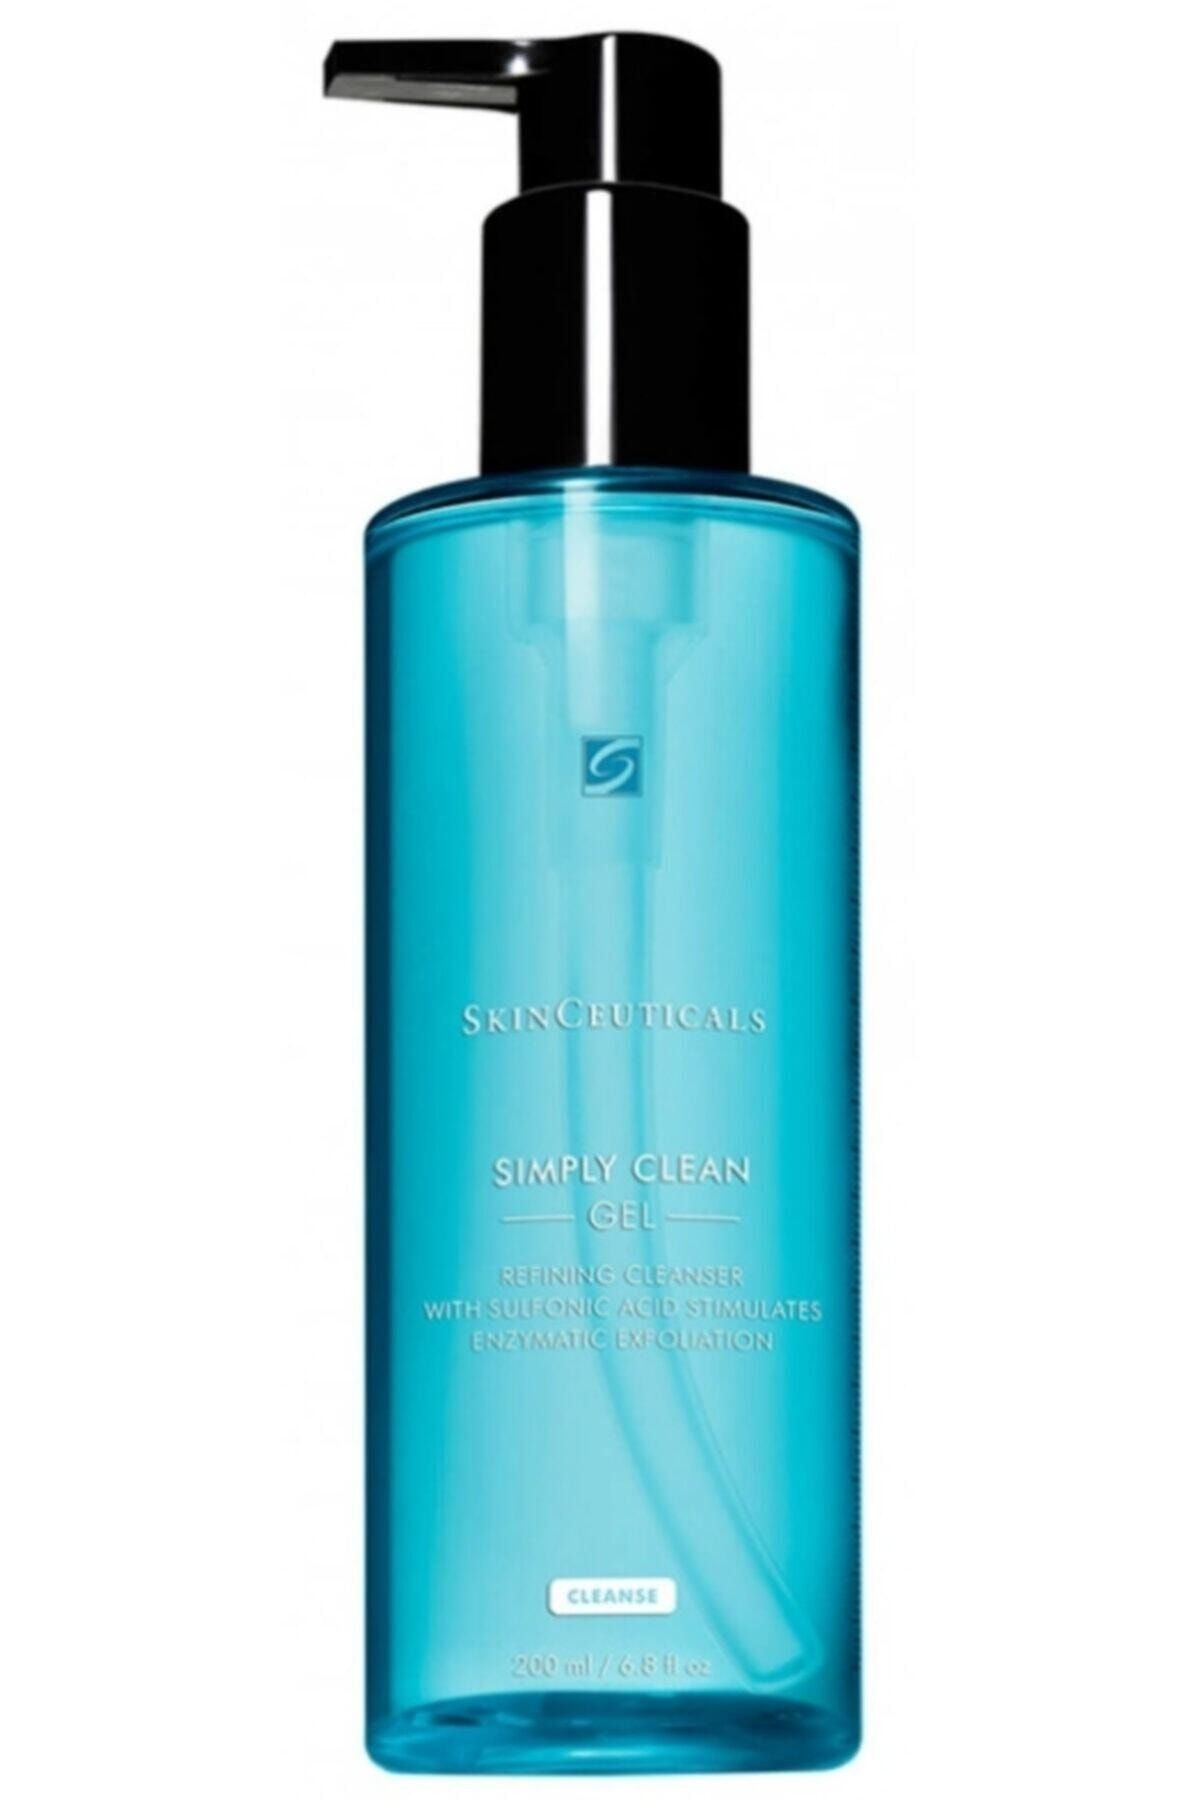 Simply cleaning. Skinceuticals гель для умывания. Skinceuticals simply clean. Skinceuticals simply clean Gel. Скин Сьютикалс simply clean.